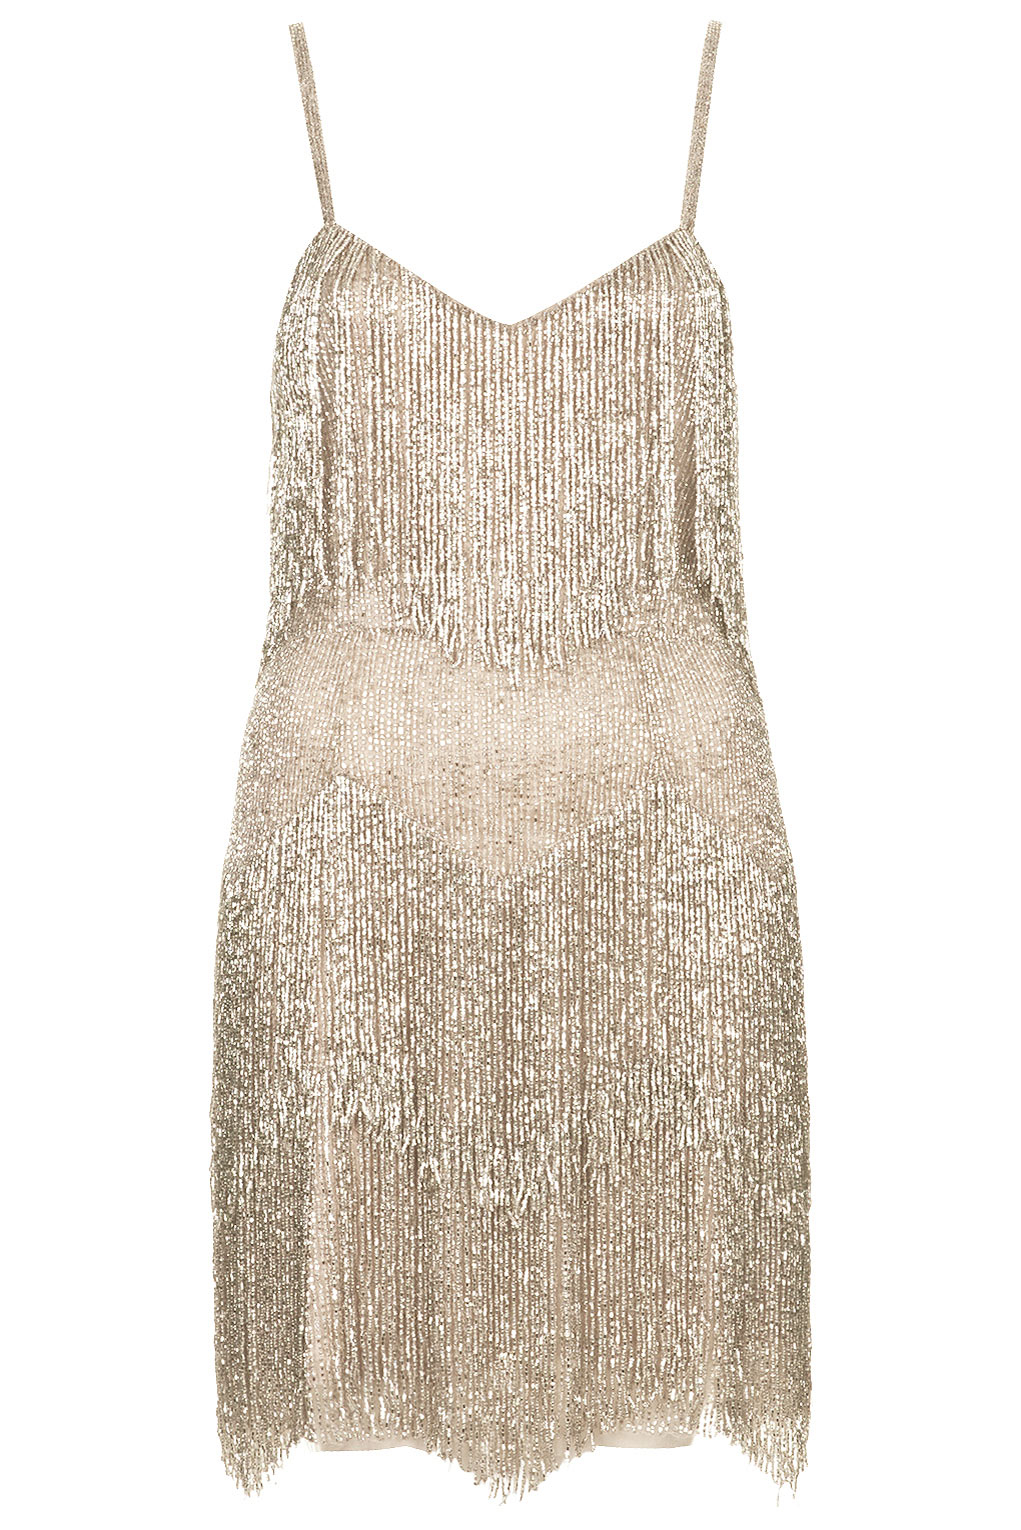 Lyst - Topshop Beaded Fringe Tiered Dress By Kate Moss For Silver in ...